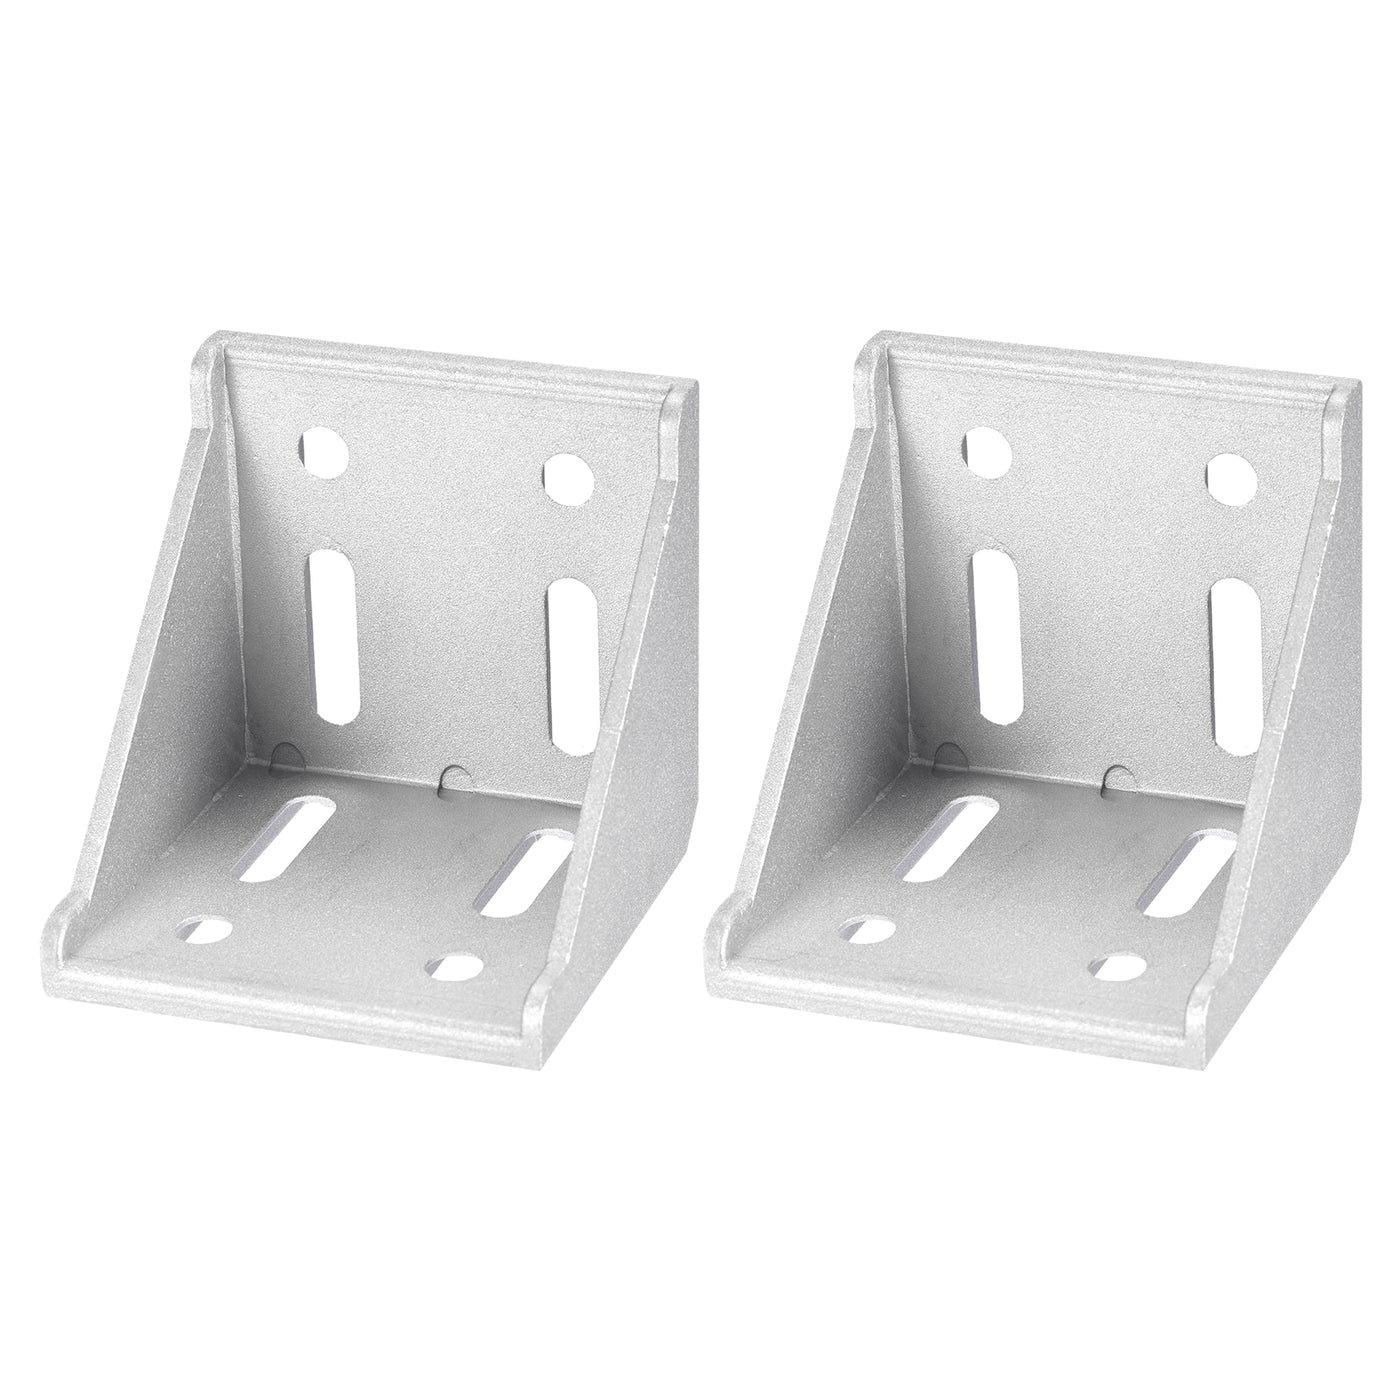 uxcell Uxcell 2Pcs Inside Corner Bracket Gusset, 78x78x79mm 8080 Angle Connectors for 4080/8080 Series Aluminum Extrusion Profile Silver